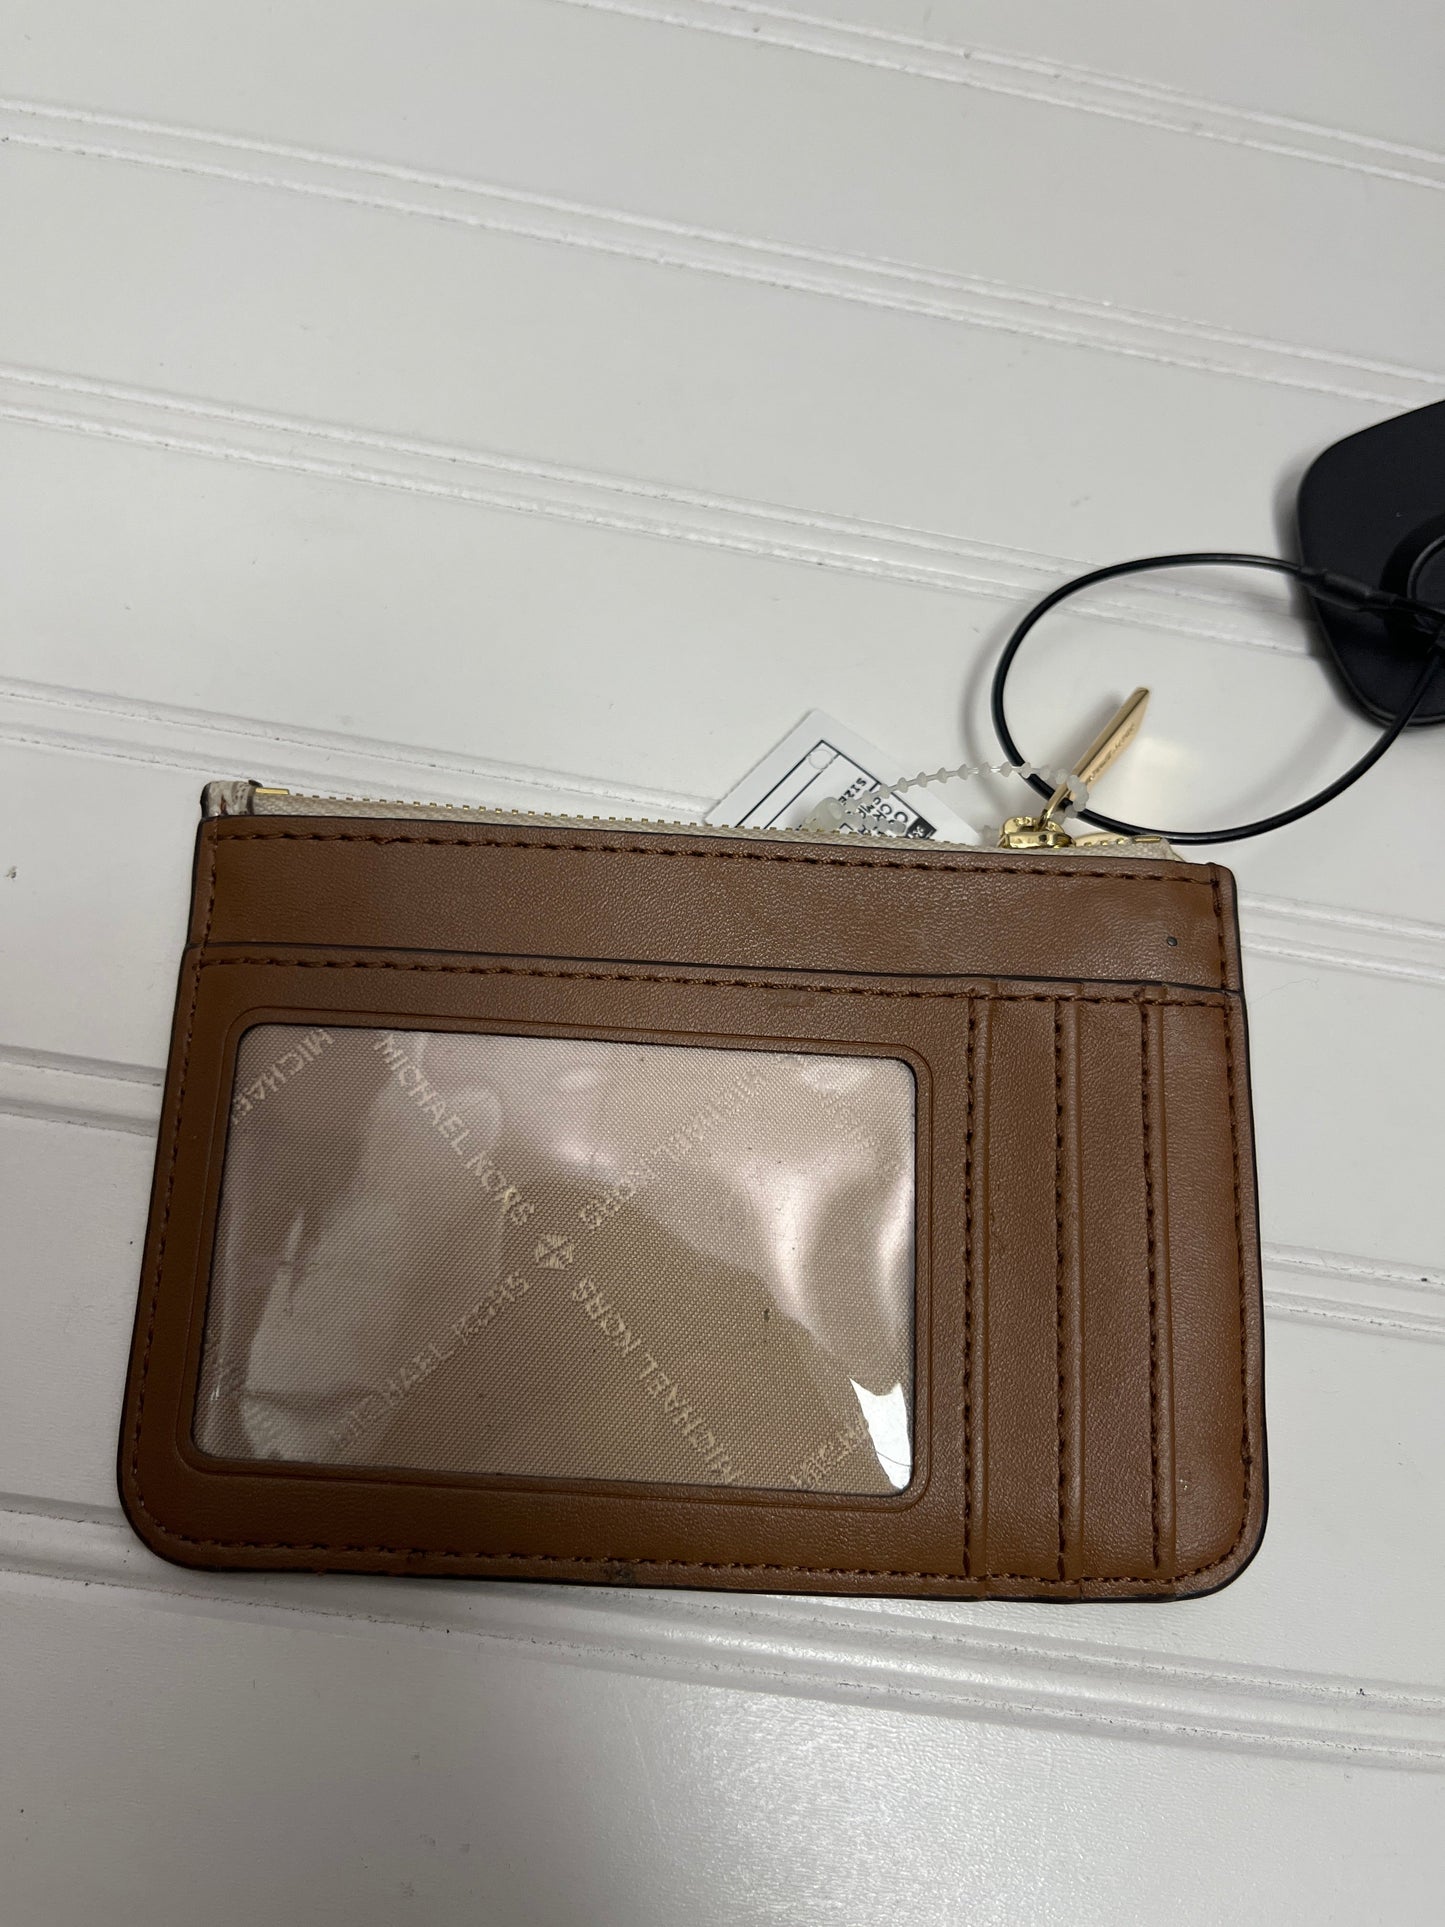 Coin Purse Michael Kors, Size Small